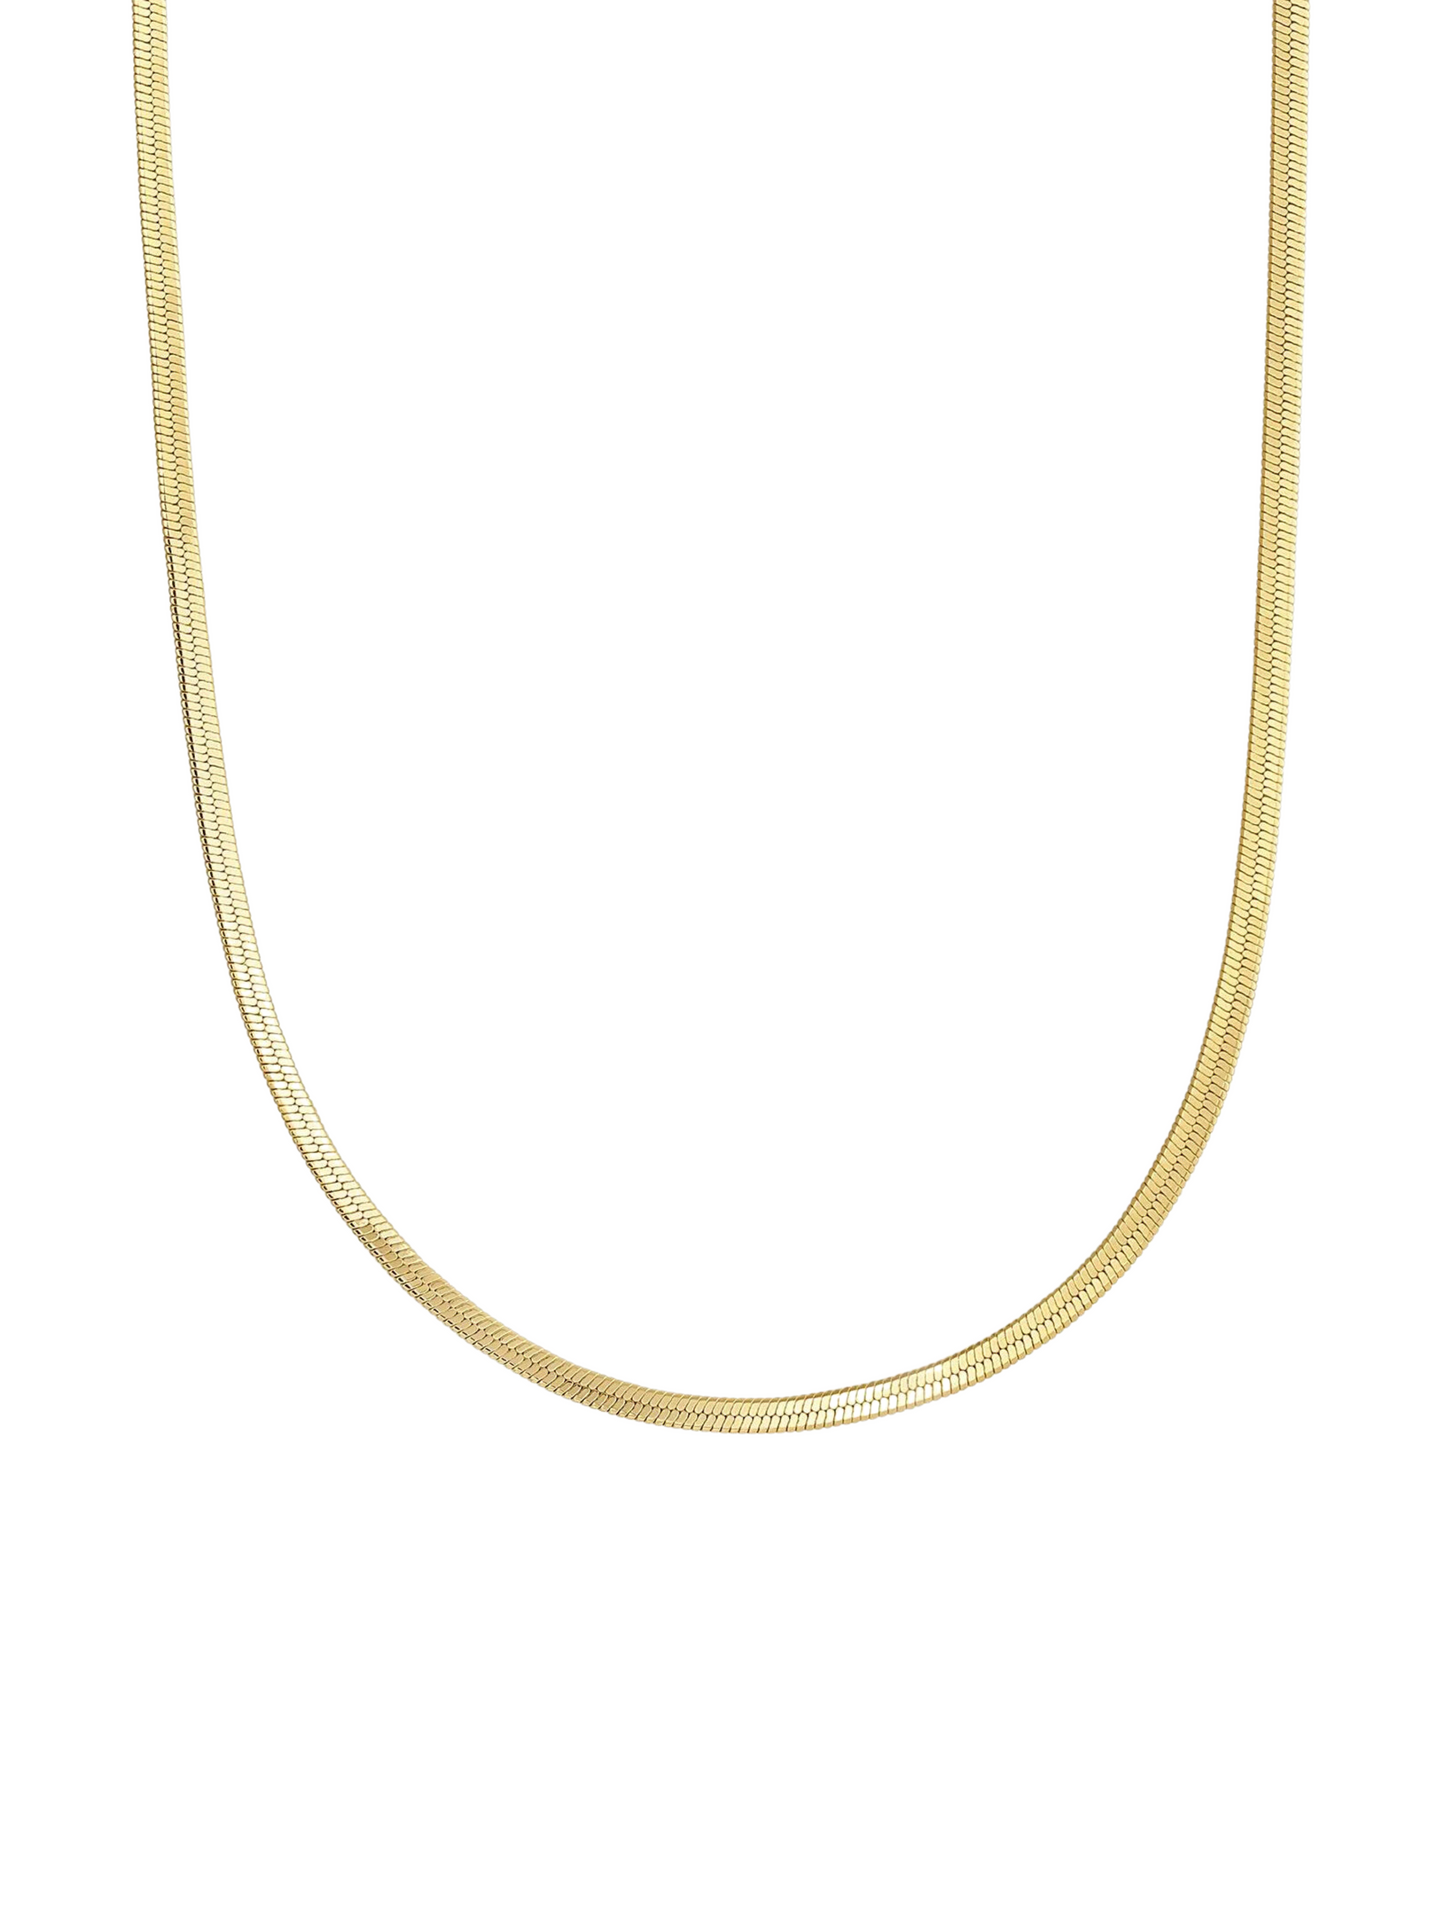 This timeless 18k gold plated herringbone chain necklace looks great layered with other necklaces.